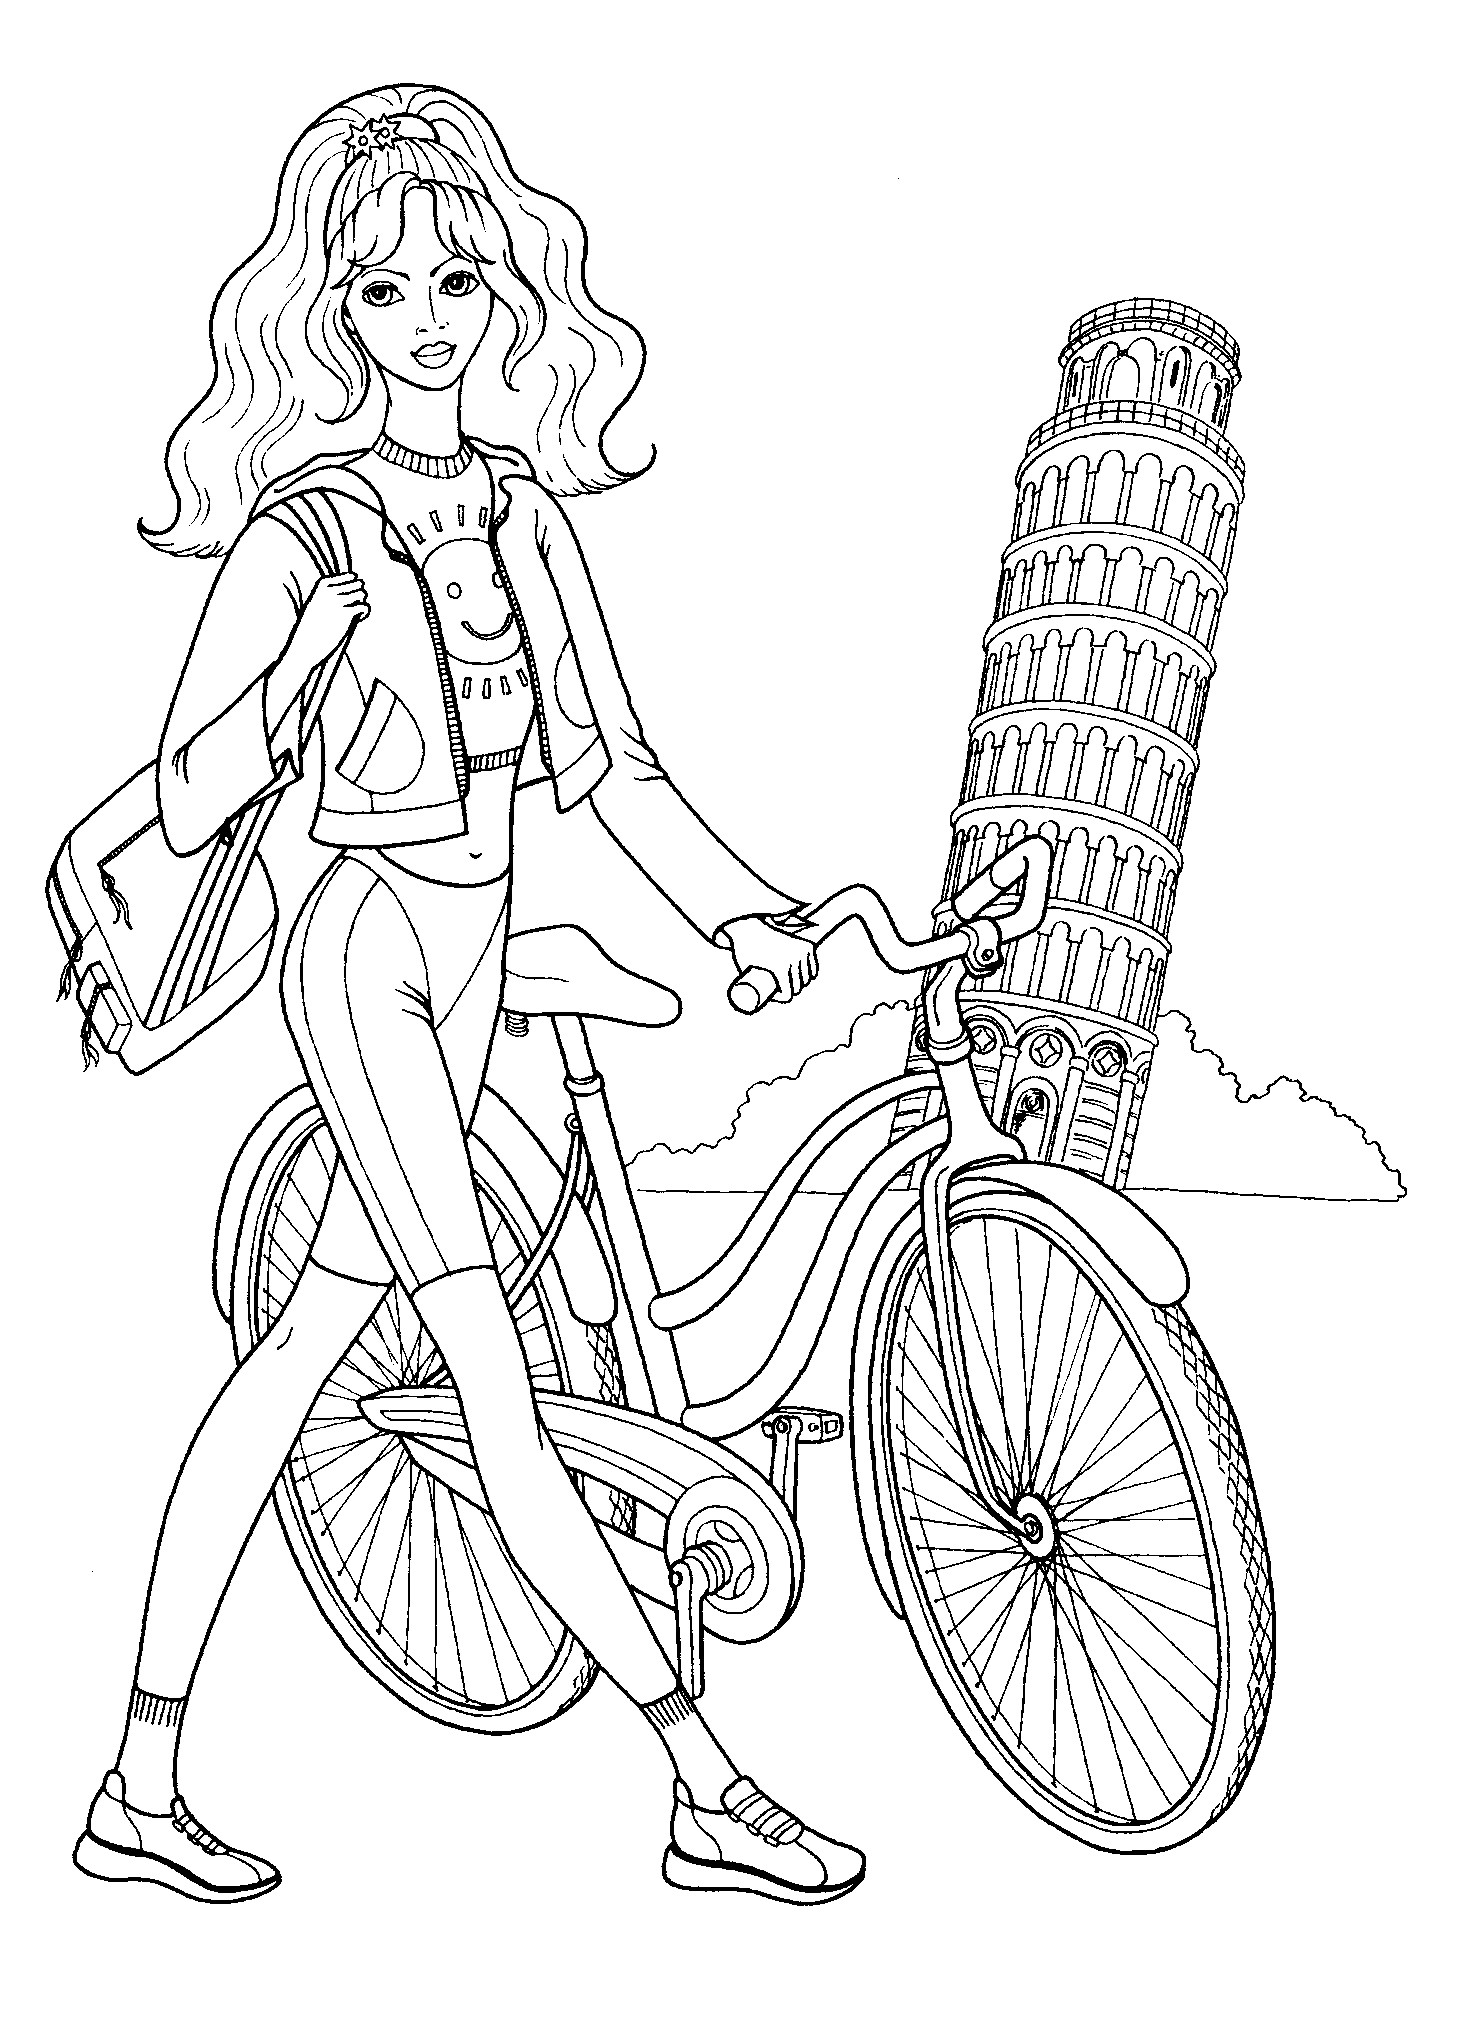 Coloring Pages To Print For Girls
 Fashionable girls coloring pages 7